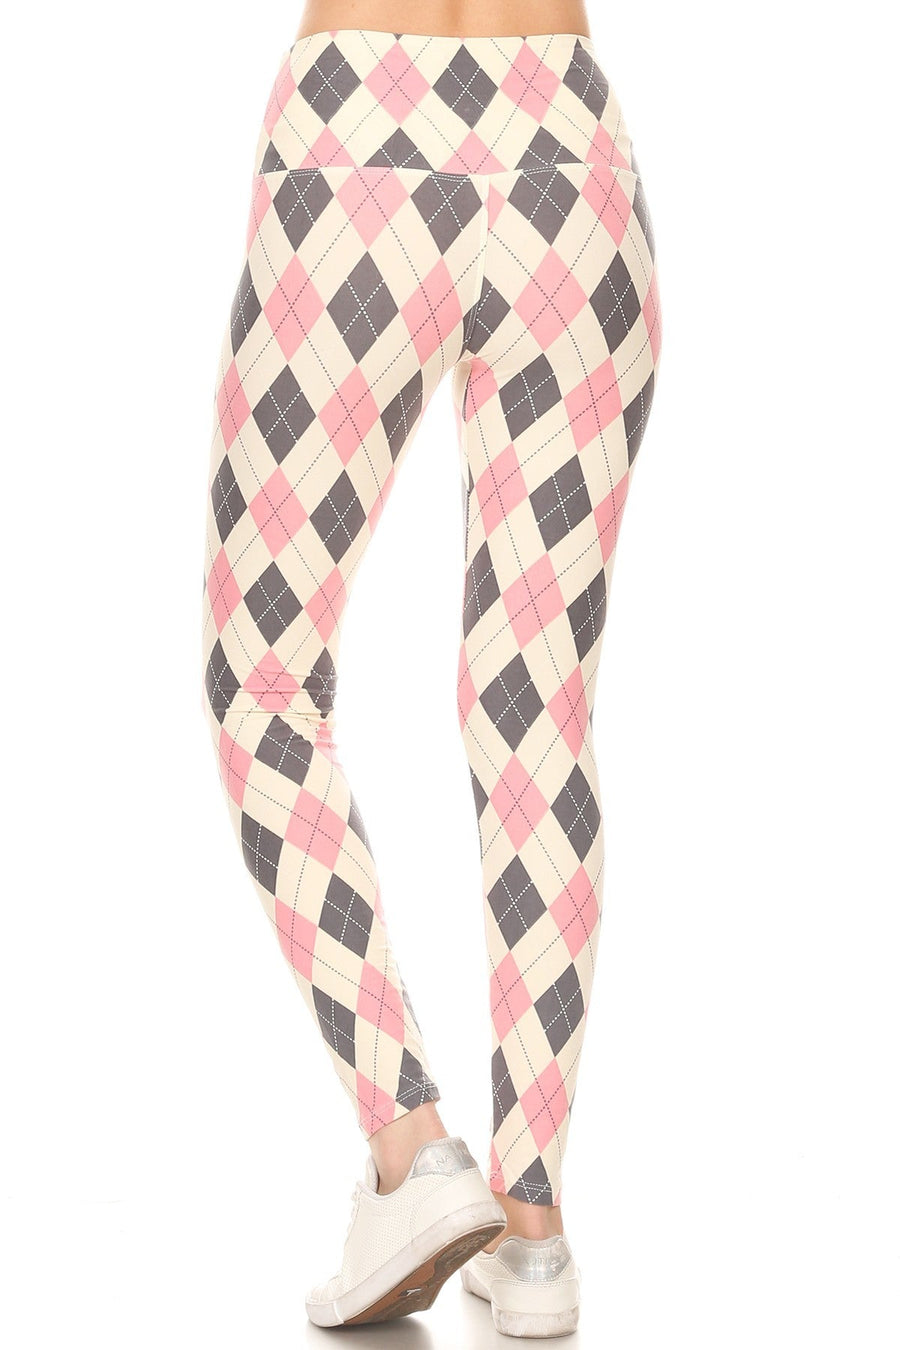 5-inch Long Yoga Style Banded Lined Argyle Printed Knit Legging With High Waist - Passion 4 Fashion USA